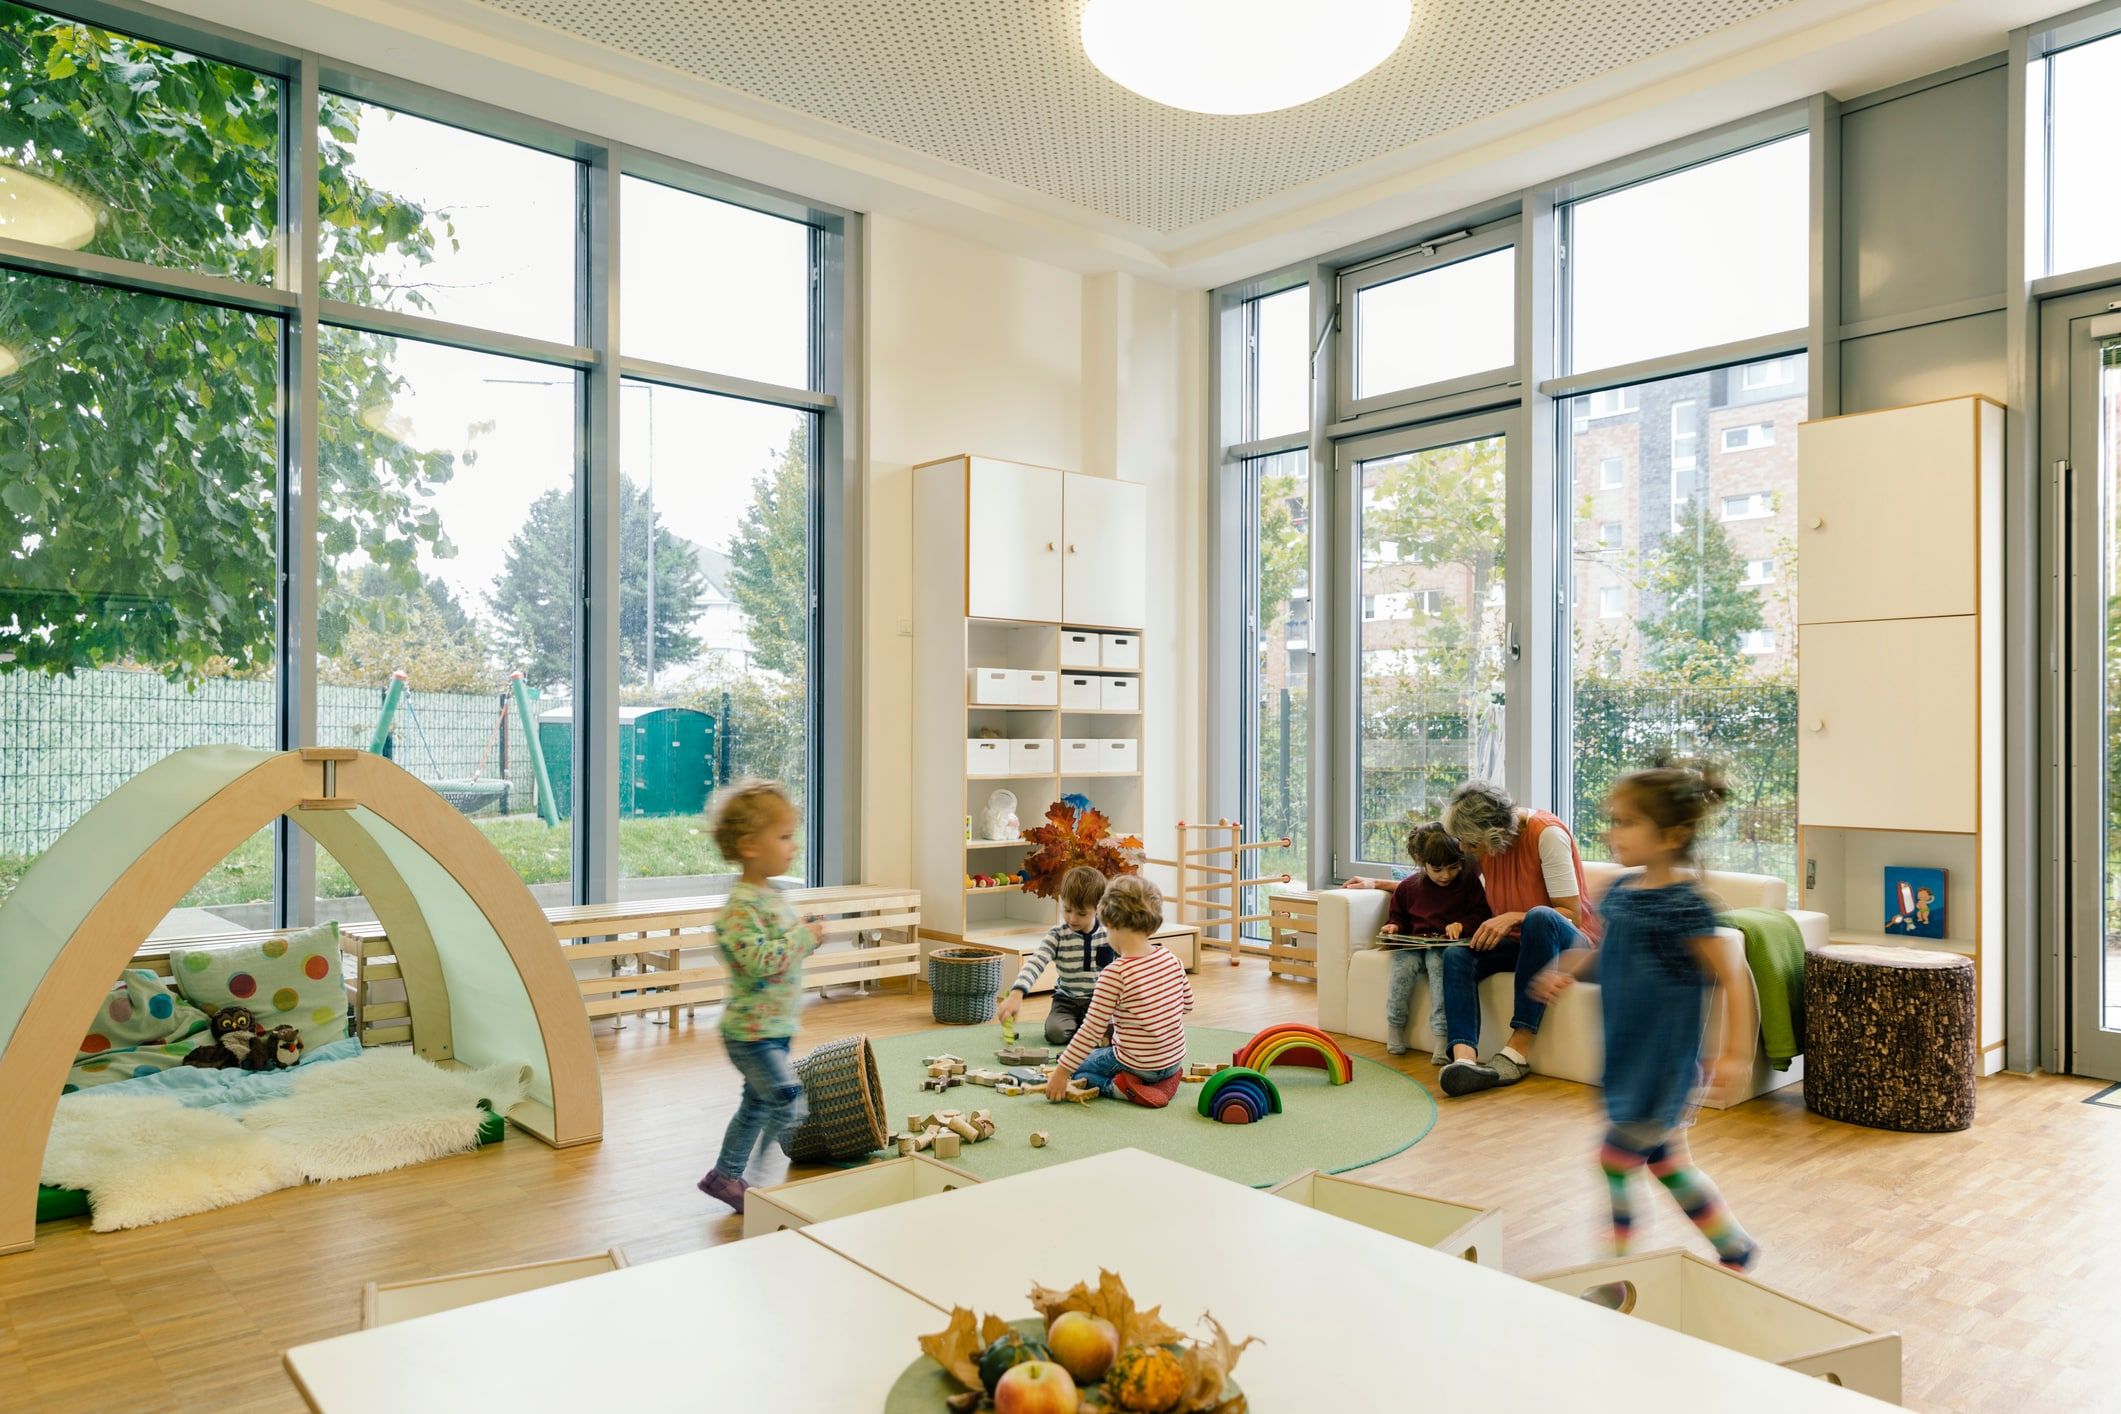 First 90 days of day care: How to know if a new center is right for your child